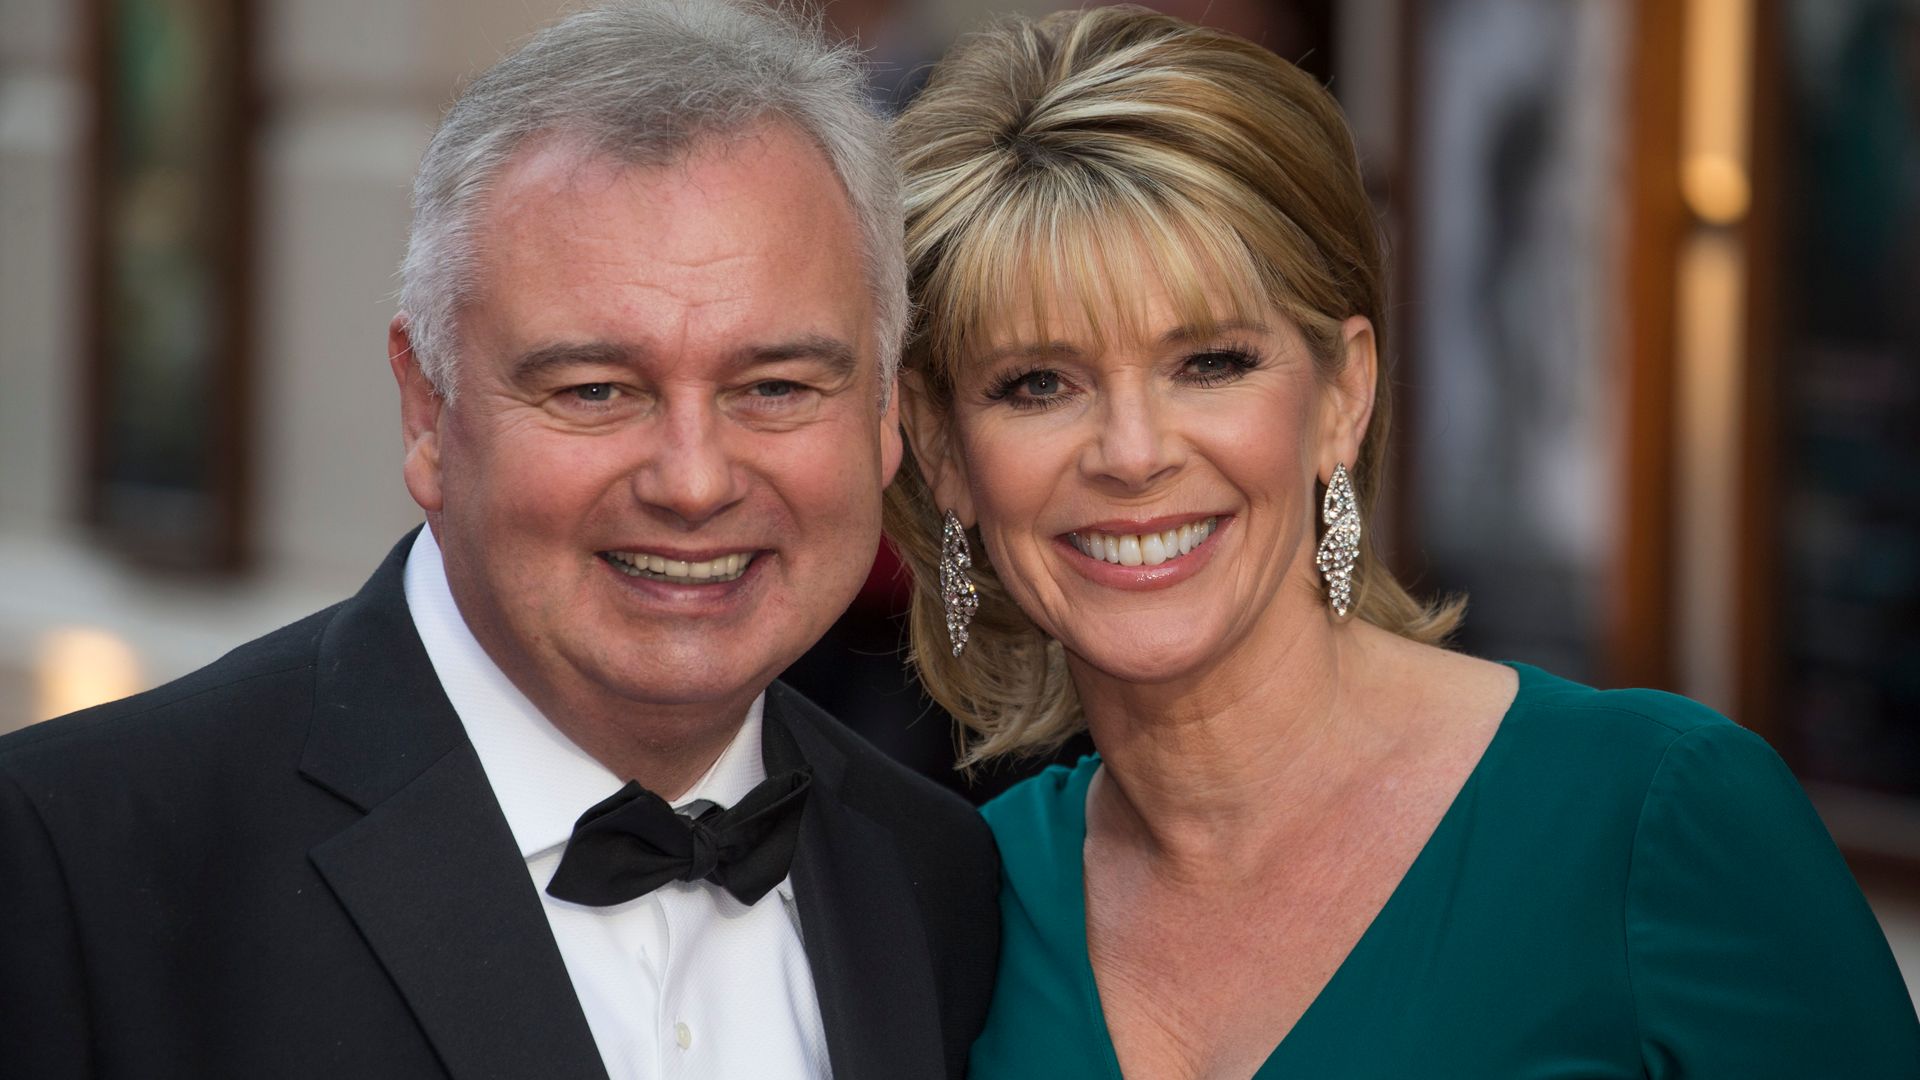 Eamonn and Ruth smiling 